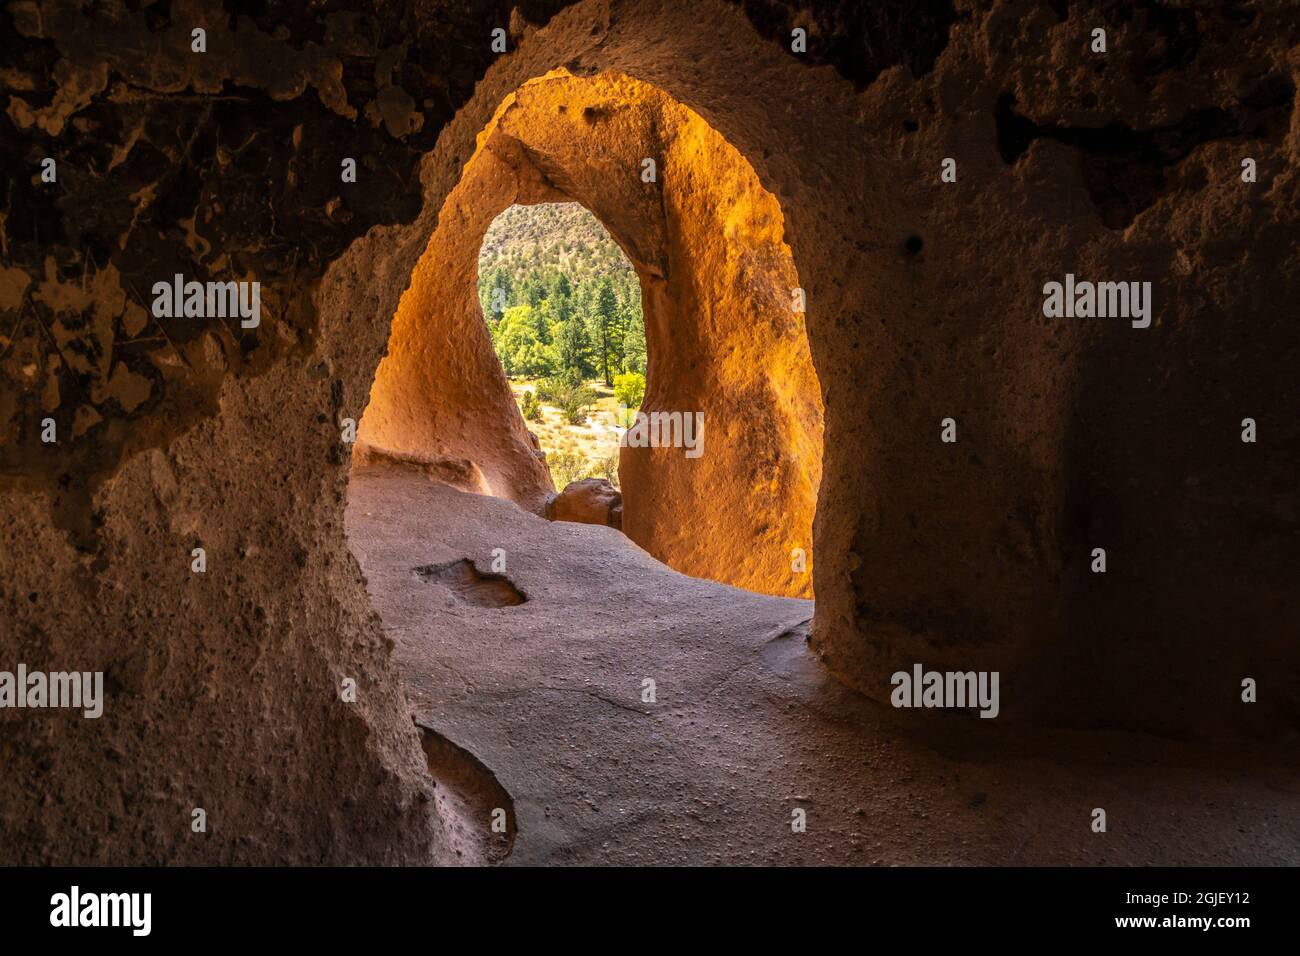 USA, New Mexico, Bandelier National Monument. Inside Indian ruins carved out of rock. Stock Photo